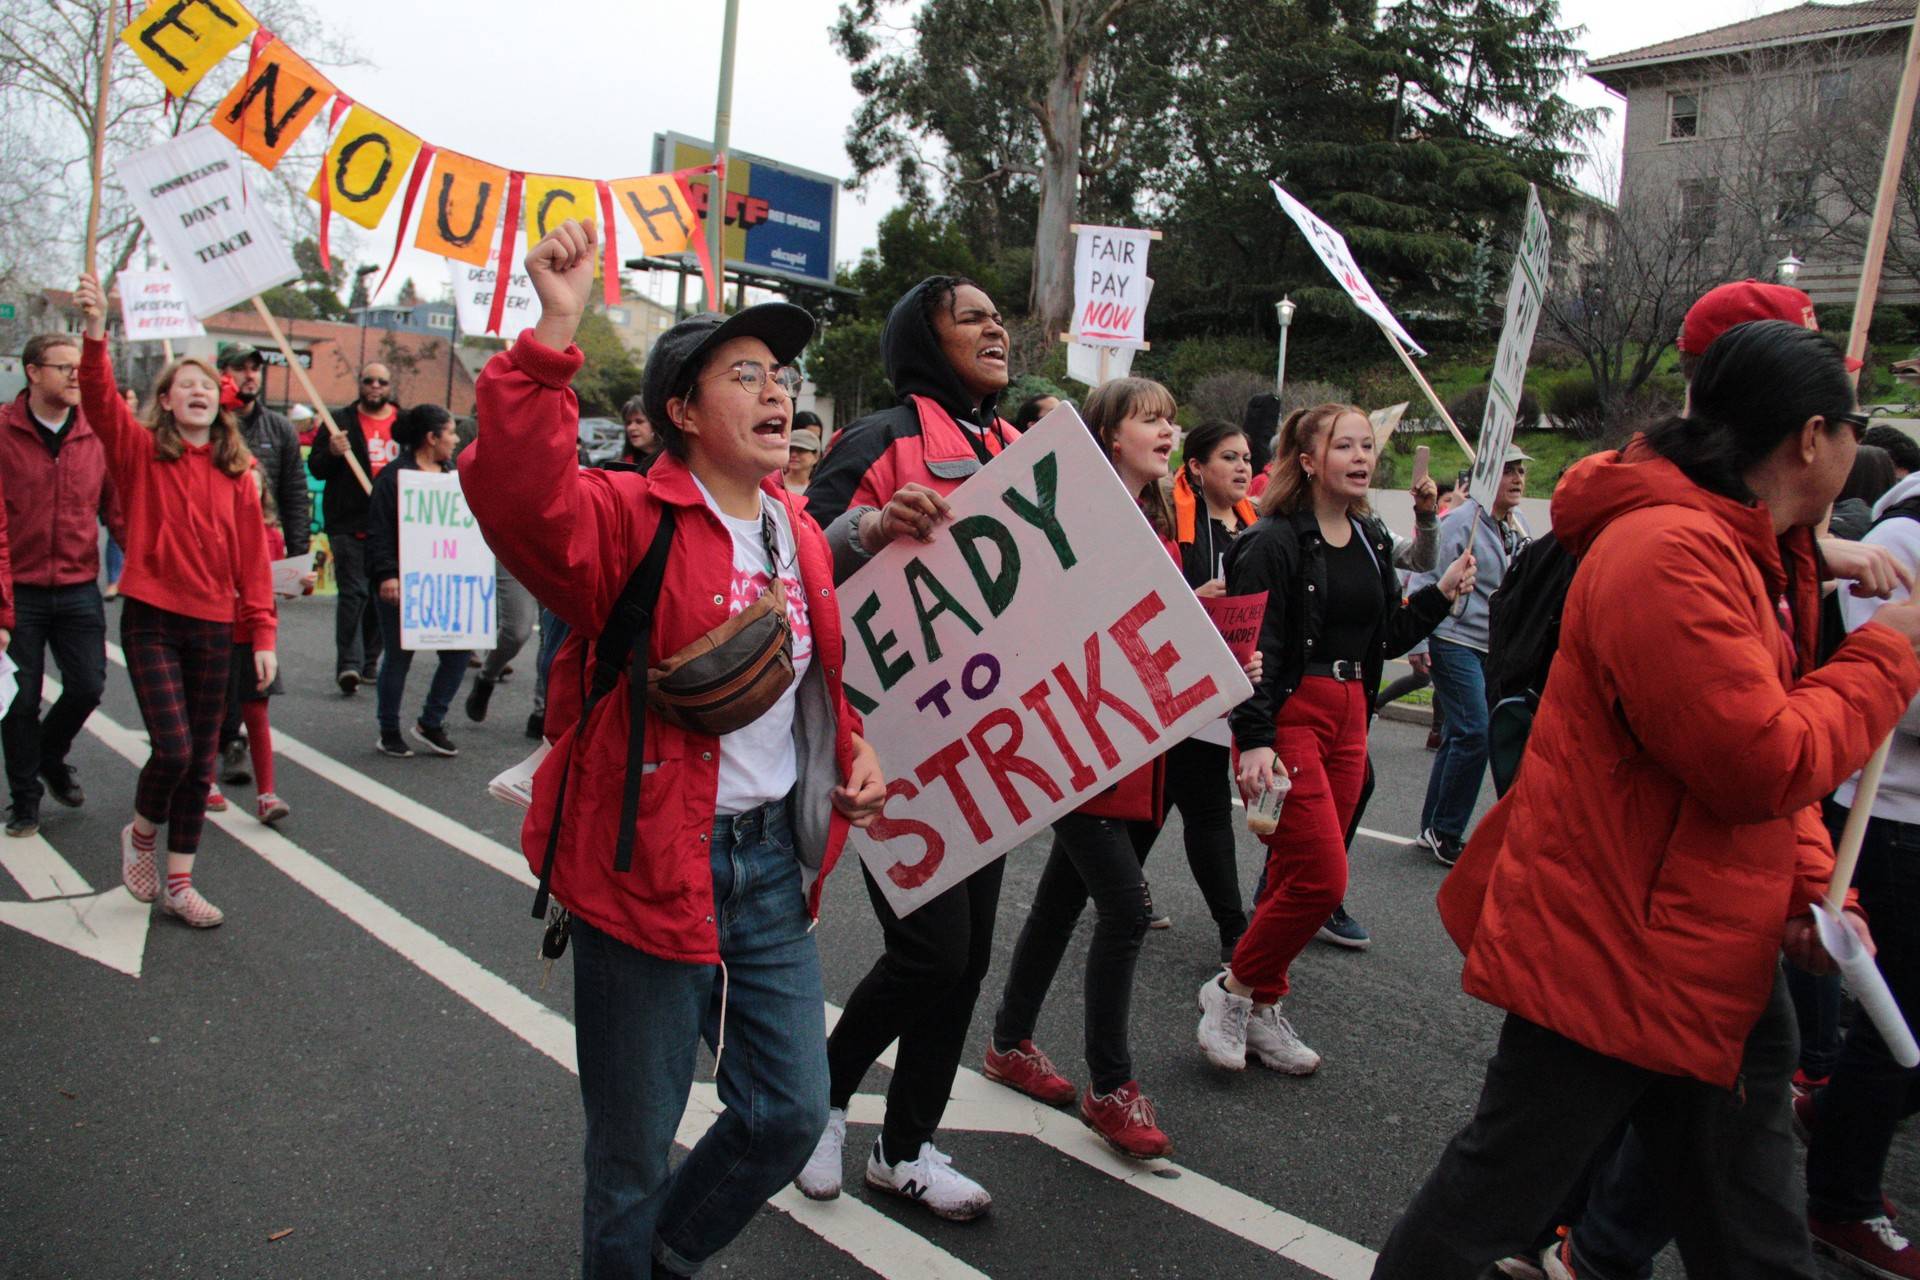 Oakland teachers march during an unsanctioned 'sickout' on Jan. 18, 2019. On Saturday, the teachers union announced that the teachers would go on strike starting Thursday, Jan. 21. Monica Lam/KQED